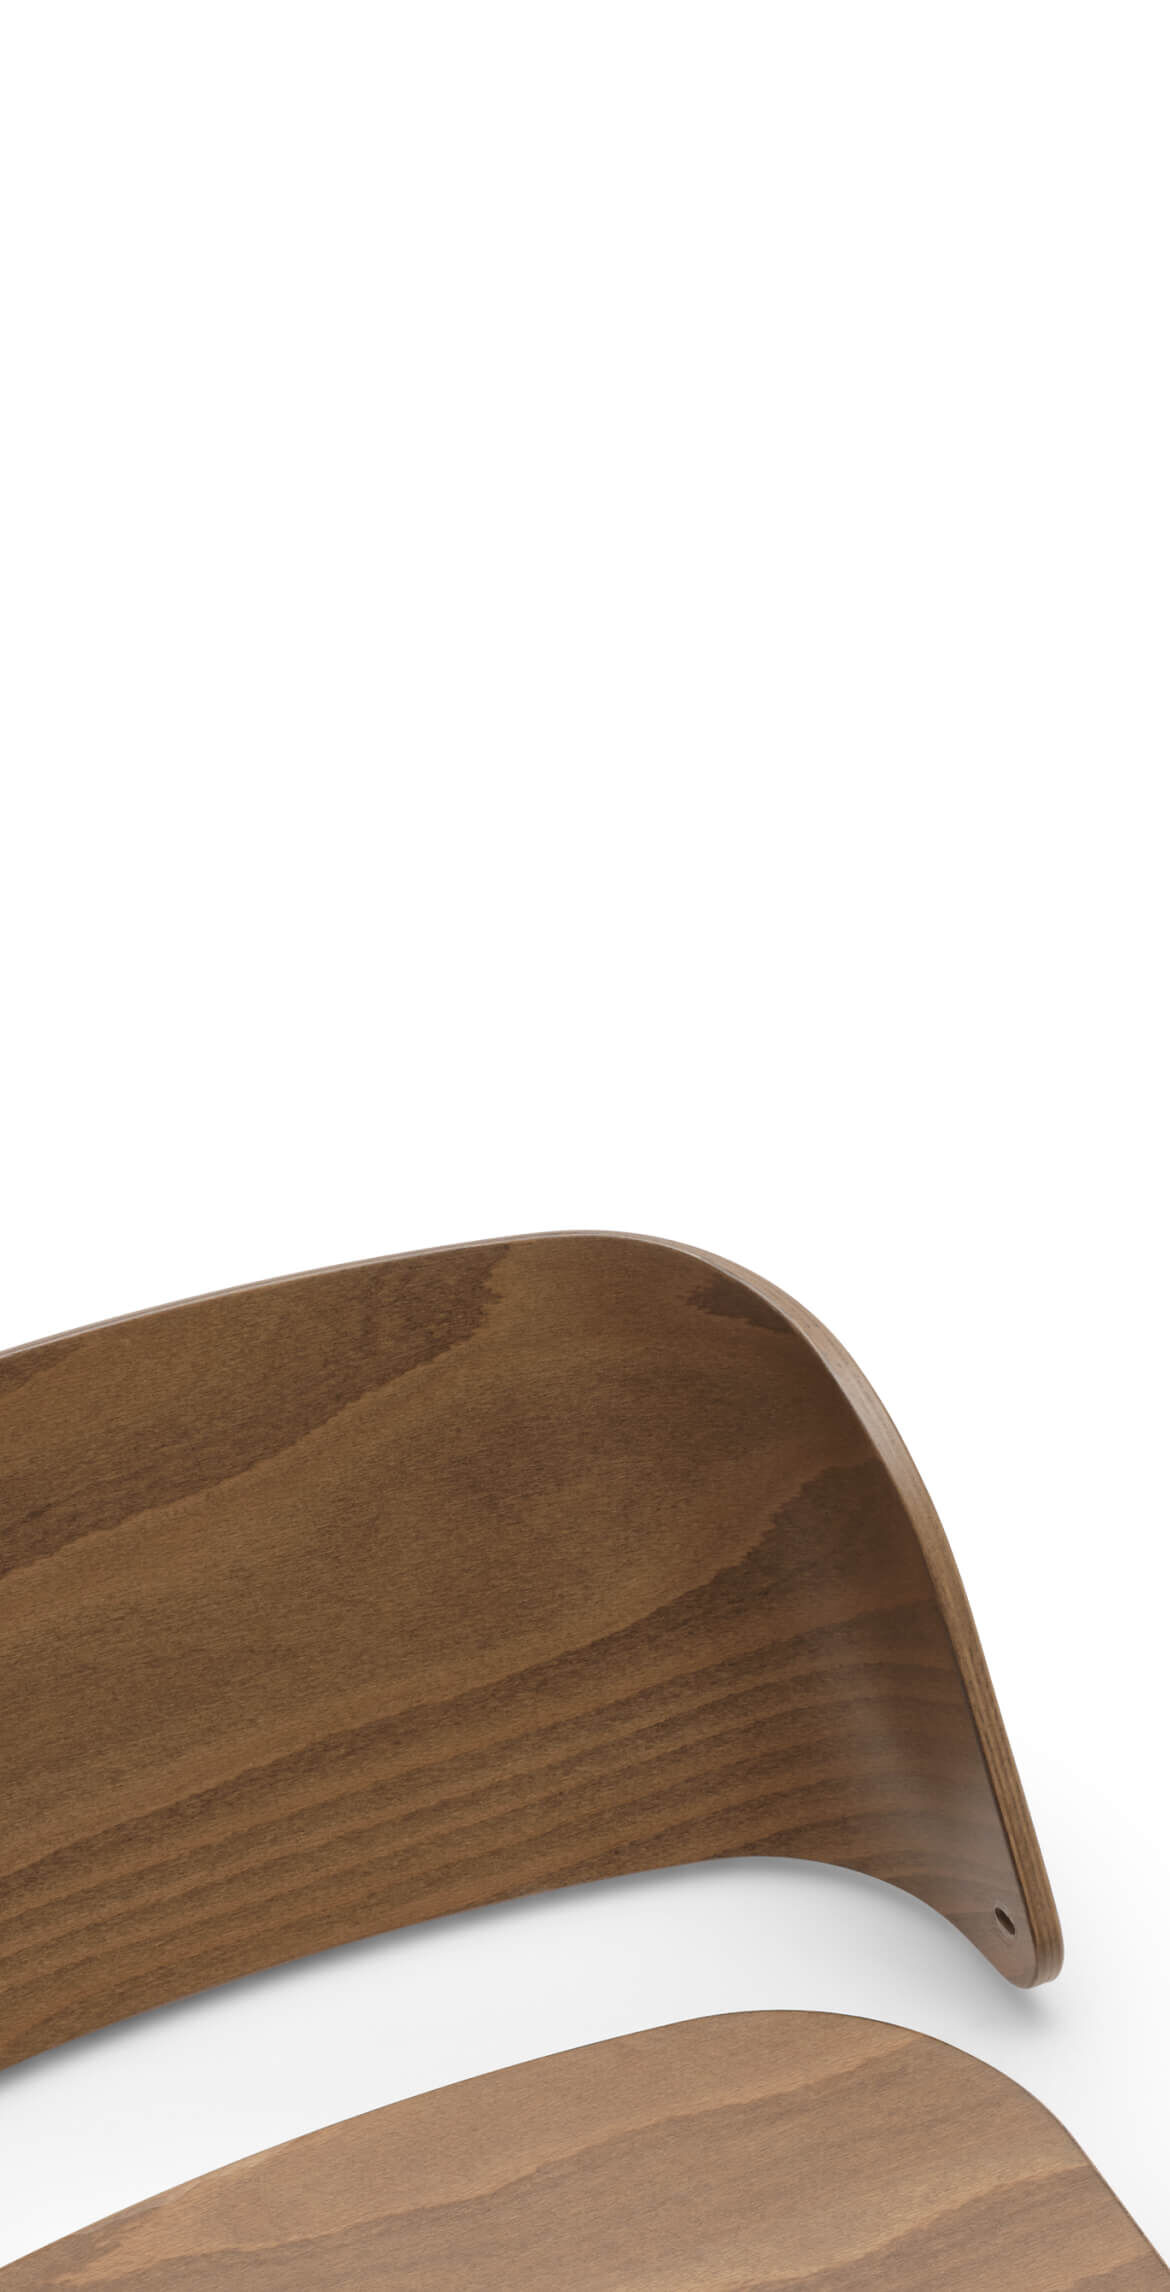 A detached backrest and seat of the Bugaboo Giraffe chair, made of natural wood with a polished, high-quality finish.